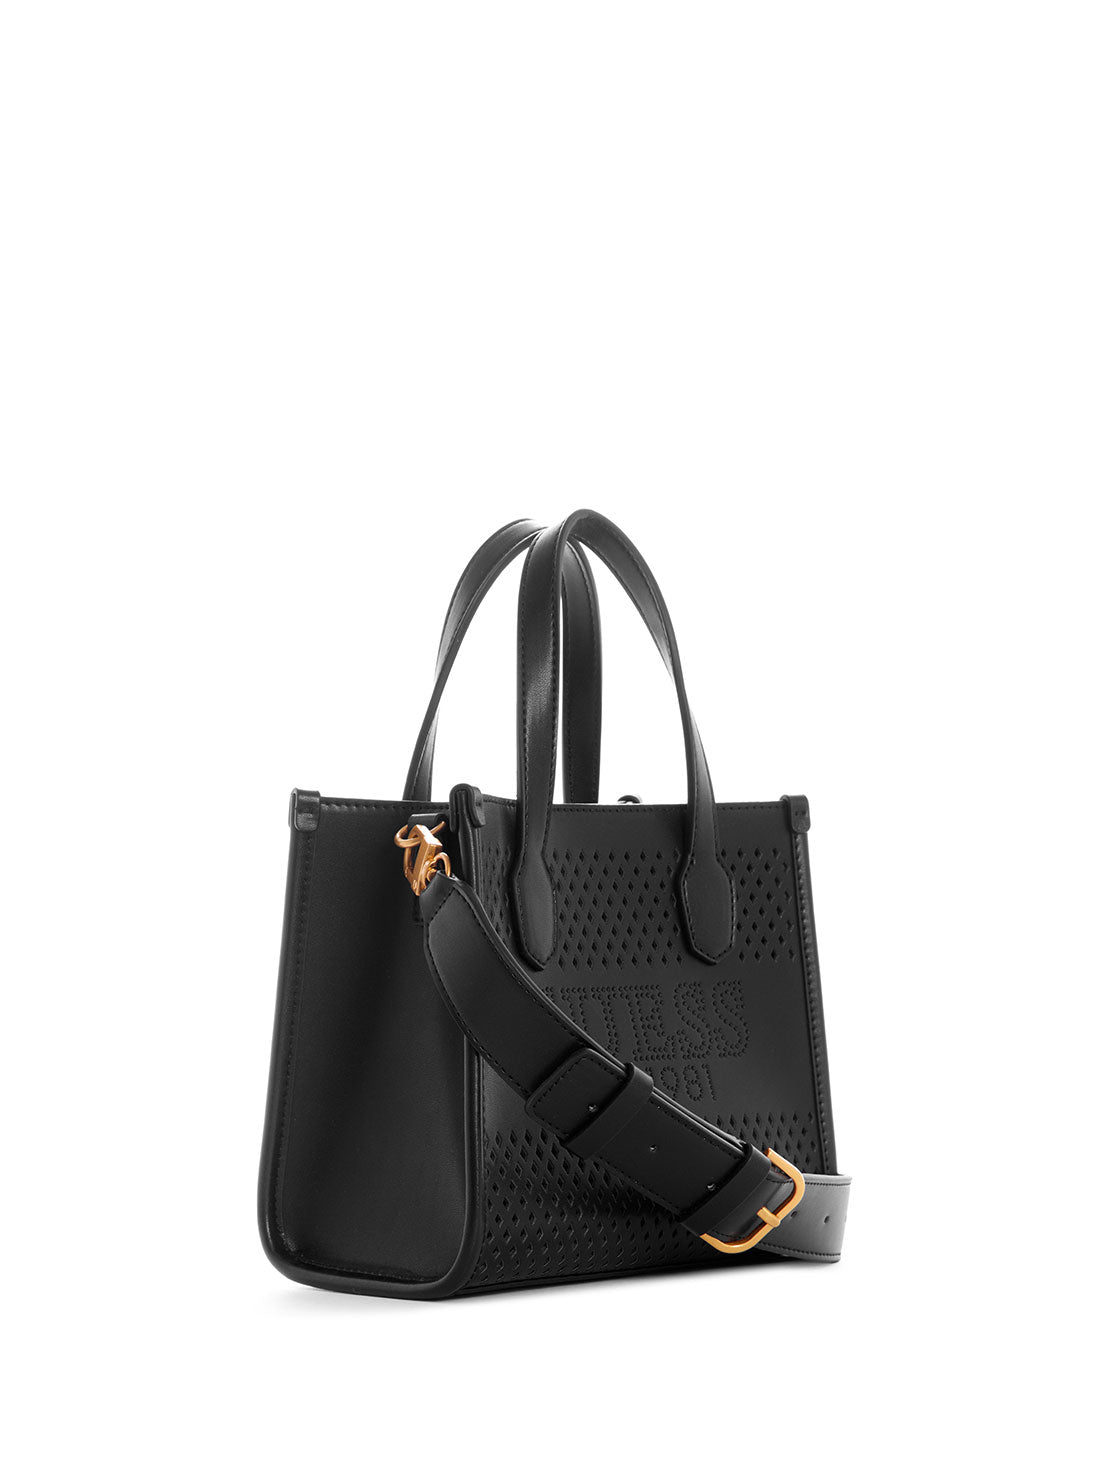 GUESS Women's Black Katey Perf Mini Tote Bag WH876976 Front Side View